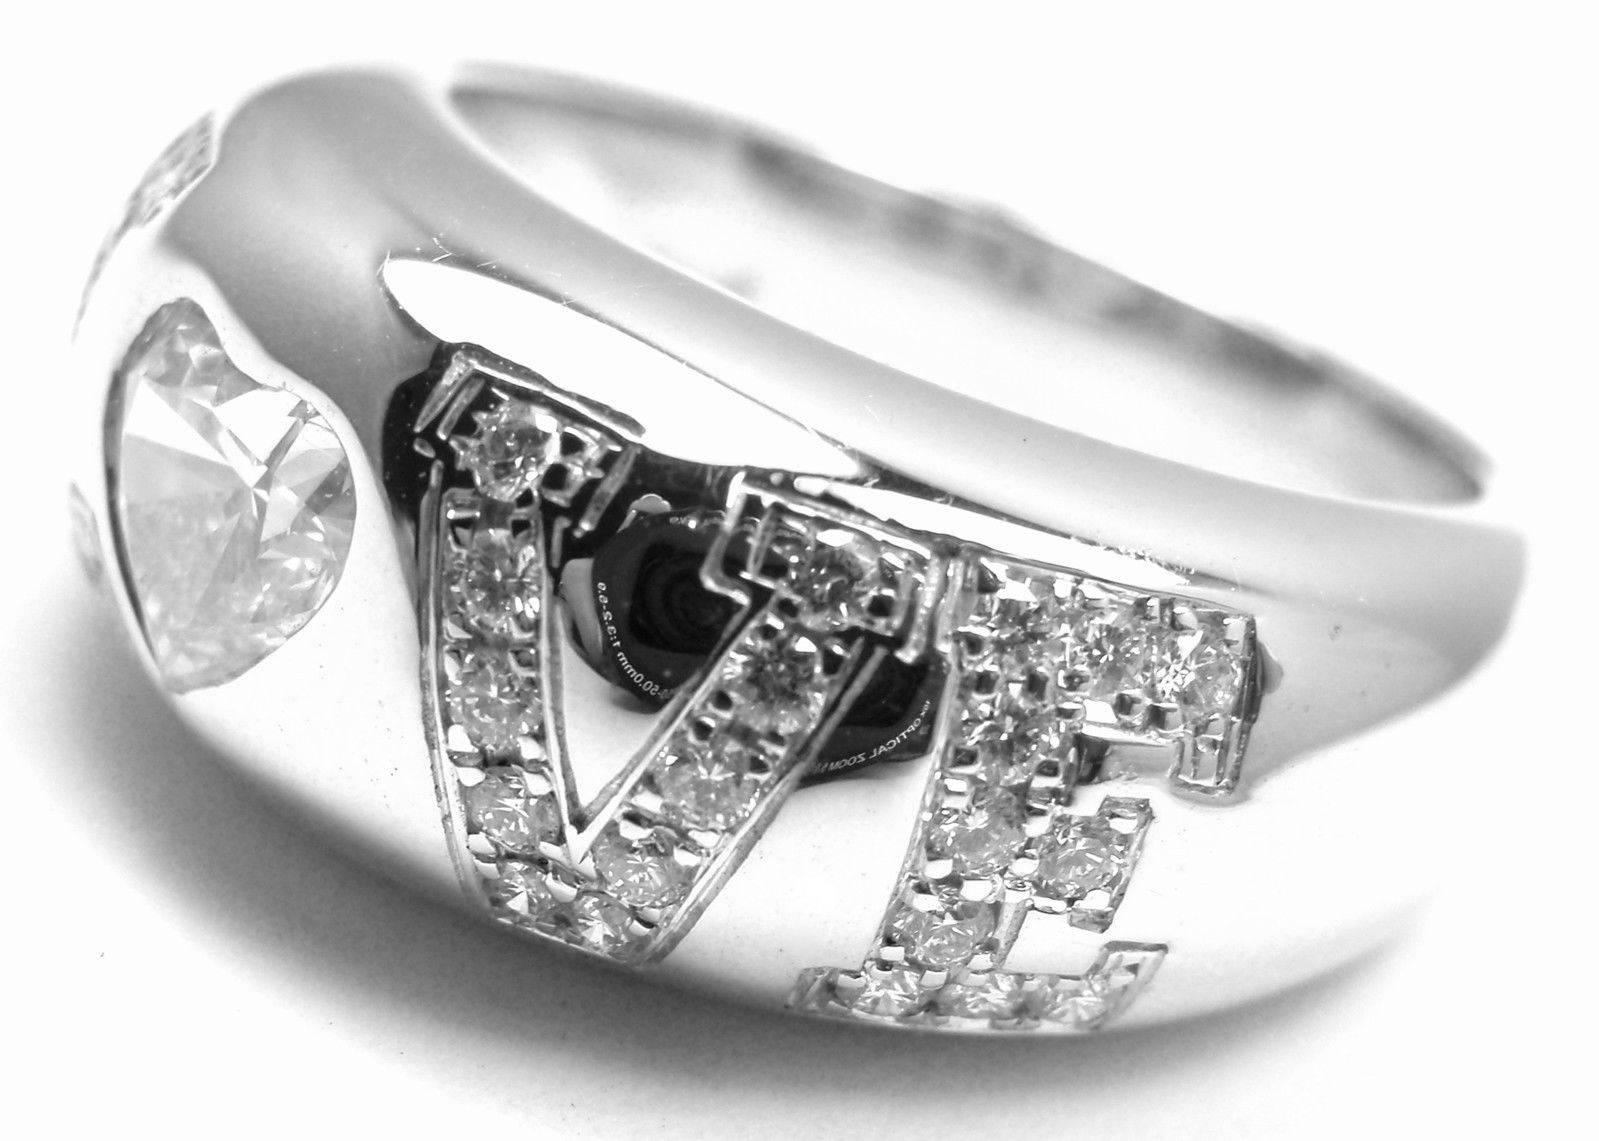 18k White Gold Heart Shape .53ct Diamond Love Band Ring by Chopard. 
This ring comes with the Chopard paper and a box.
With
1 heart shape diamond VS1 clarity, G color total weight .53ct
28 round brilliant cut diamonds VS1 clarity, G color total